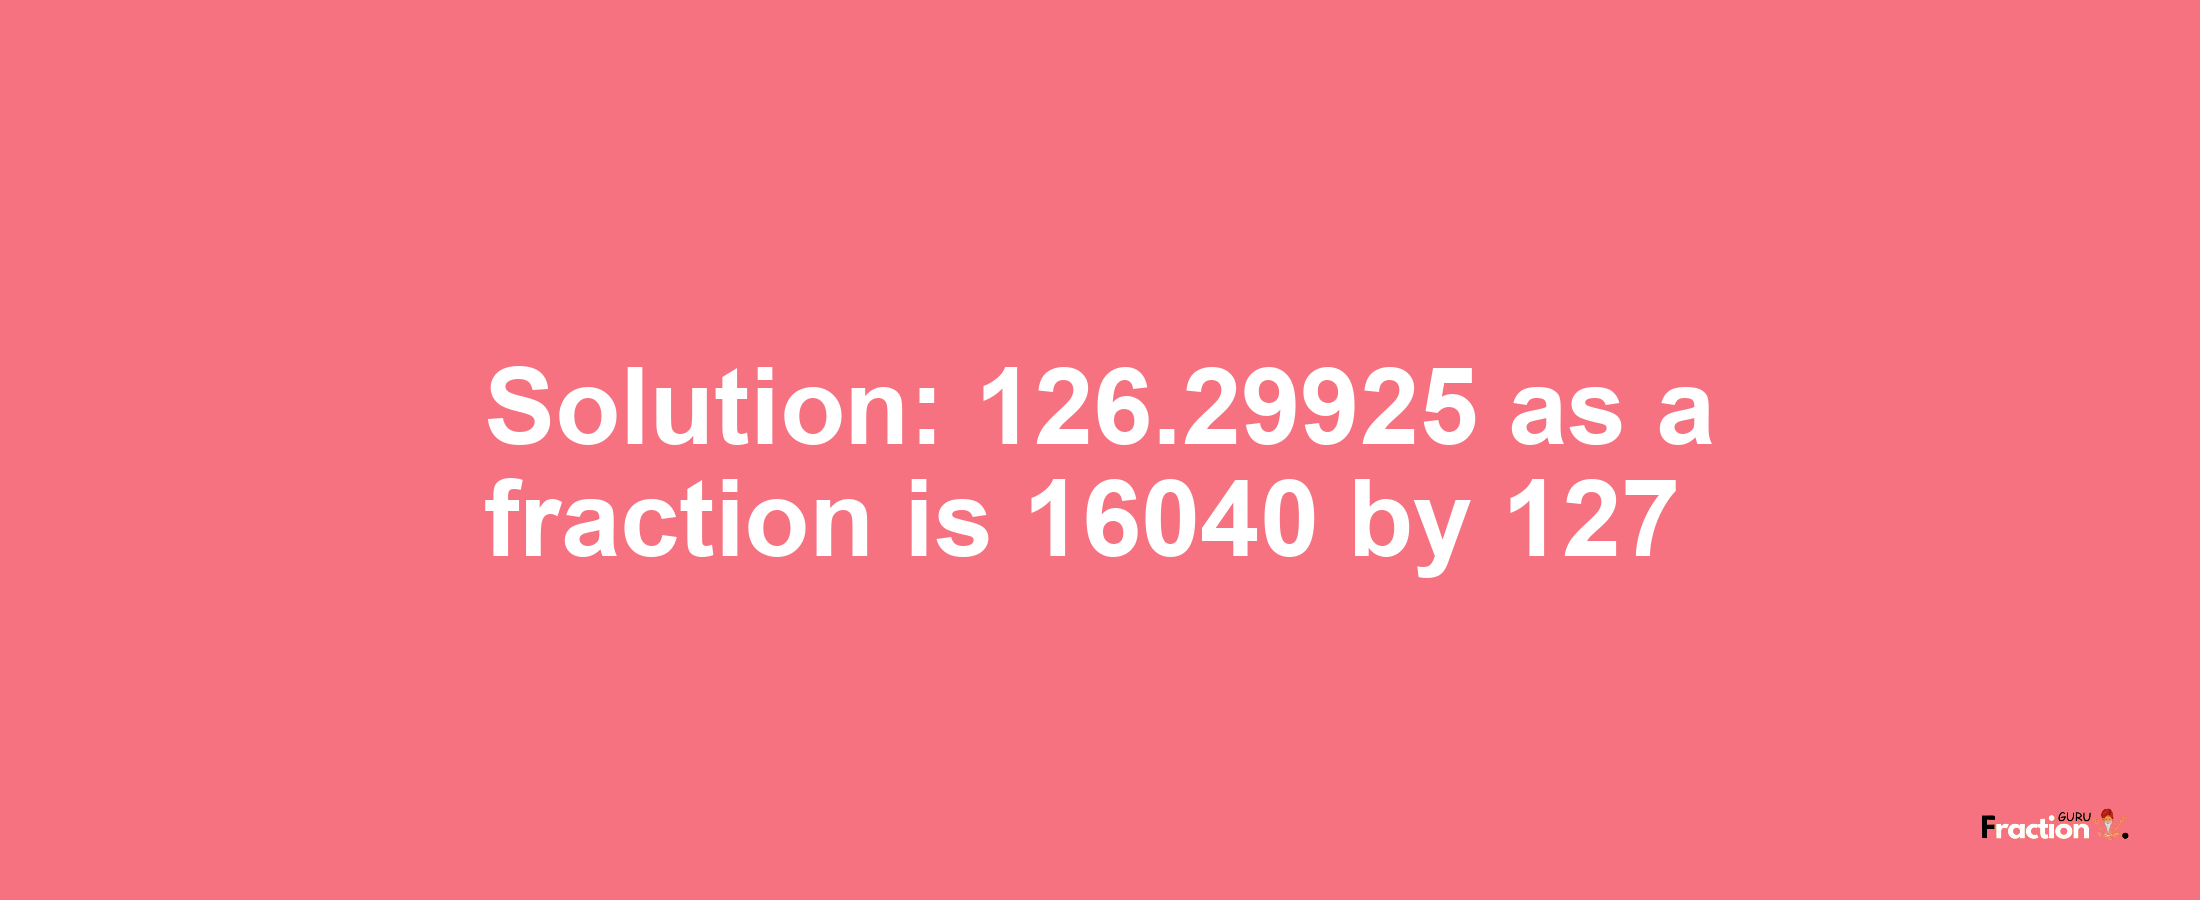 Solution:126.29925 as a fraction is 16040/127